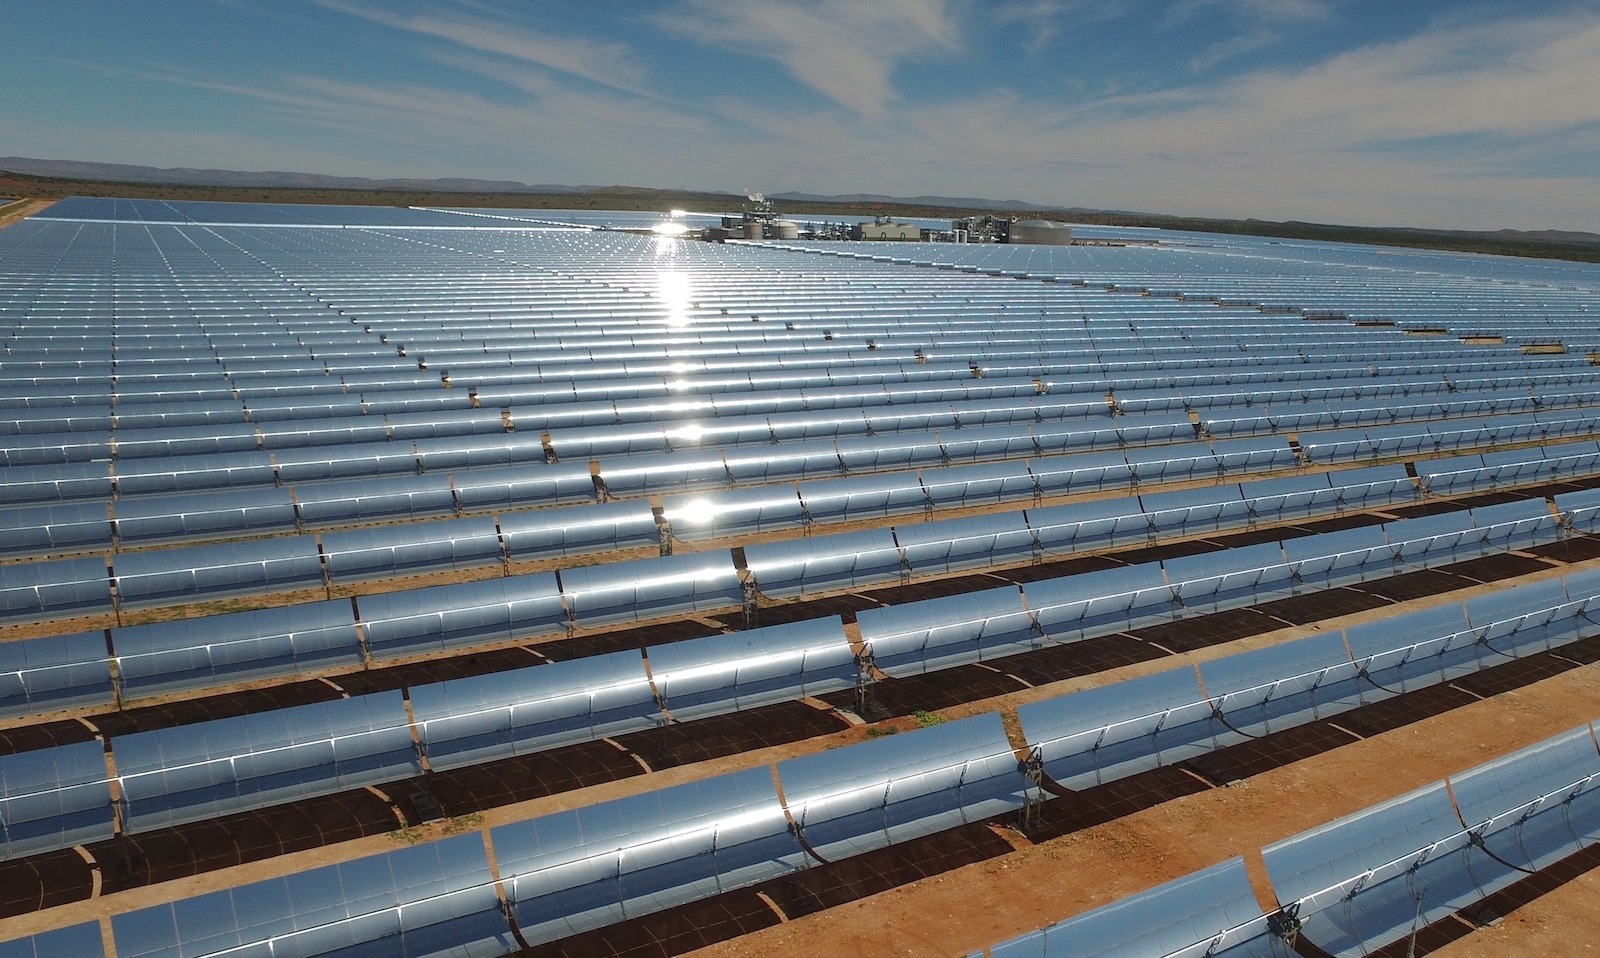 Botswana is Now Looking for Bids to Build 200 MW of CSP